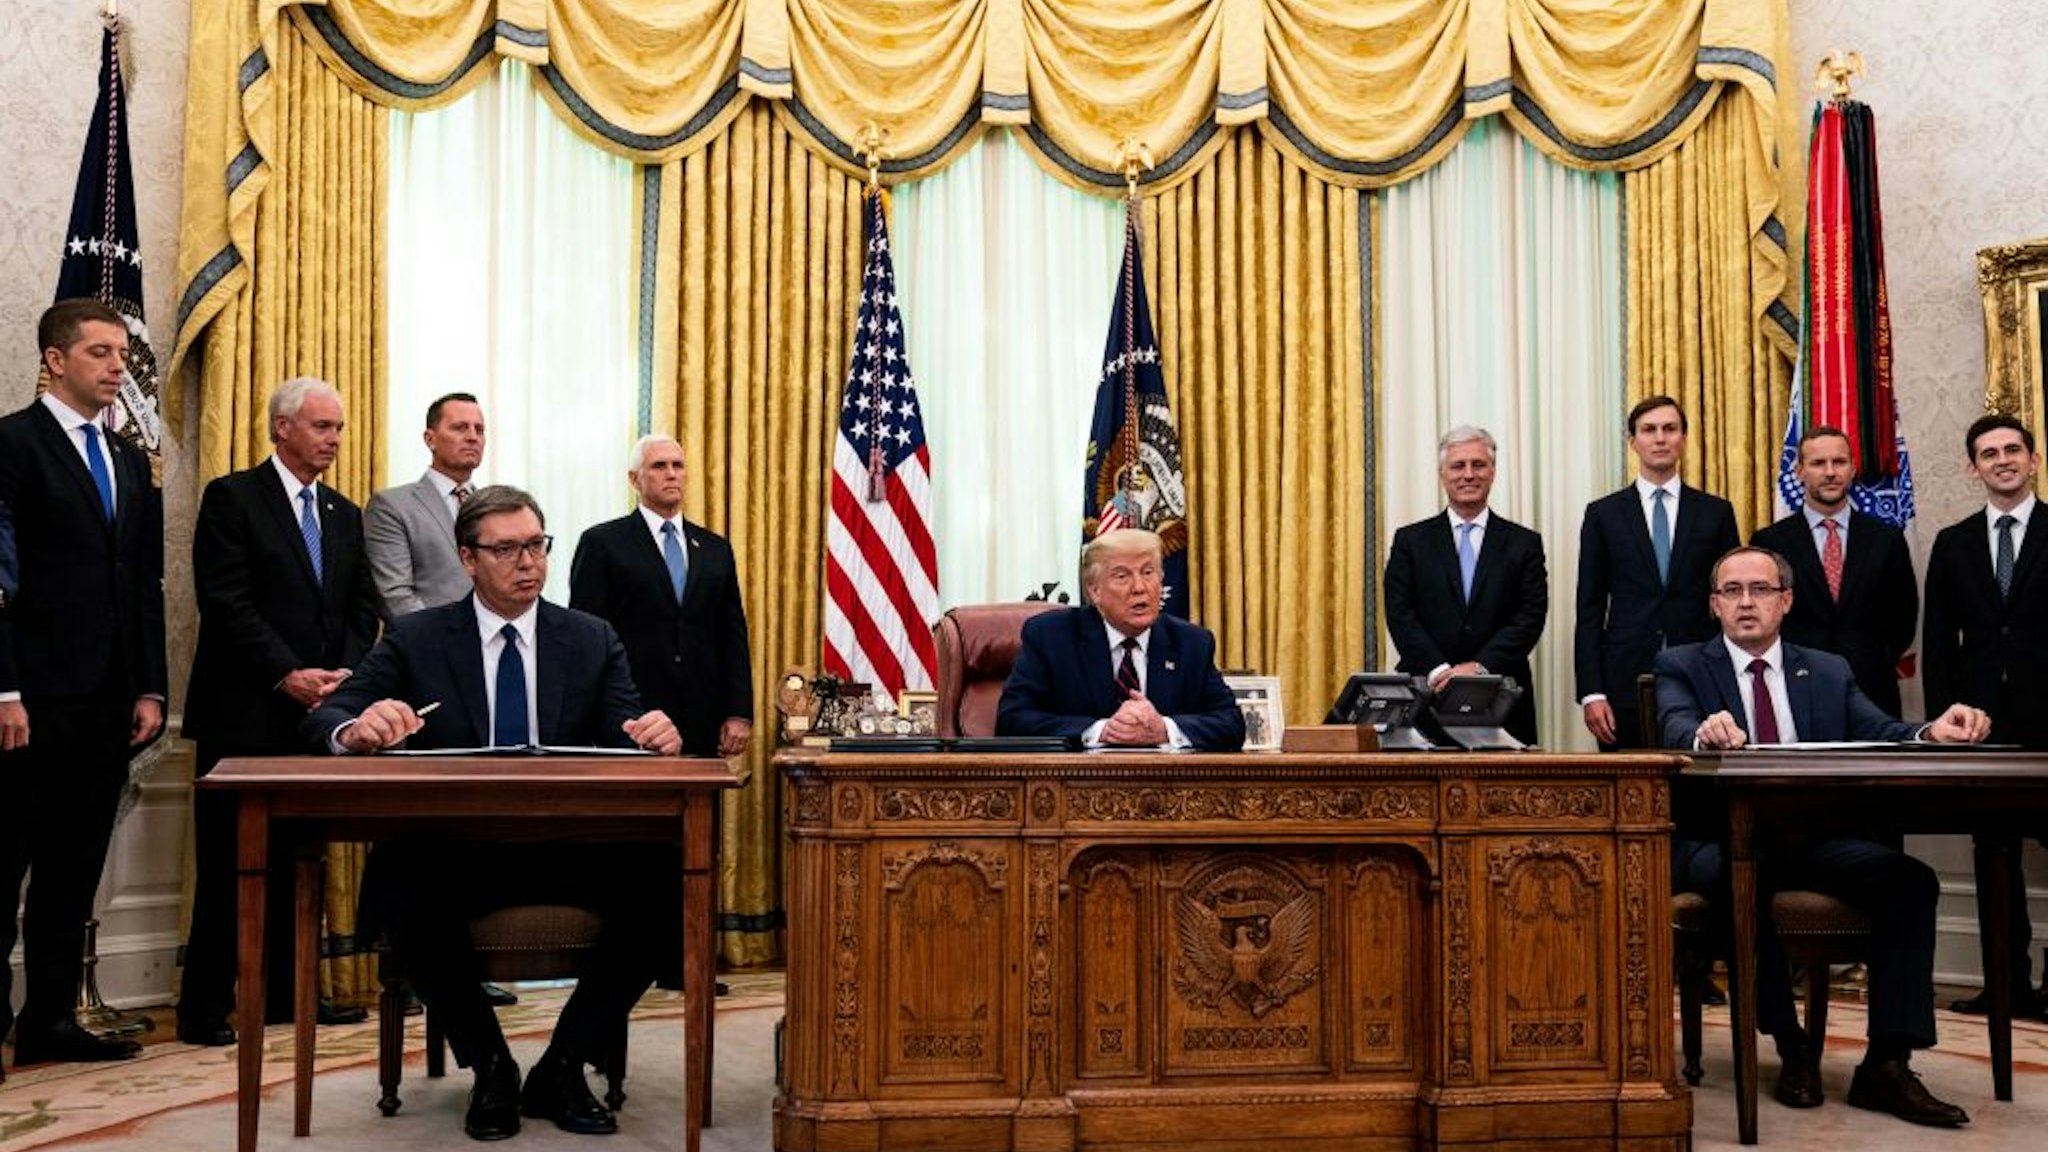 U.S. President Donald Trump (C) participates in a signing ceremony and meeting with the President of Serbia Aleksandar Vucic (L) and the Prime Minister of Kosovo Avdullah Hoti (R) in the Oval Office of the White House on September 4, 2020 in Washington, DC.